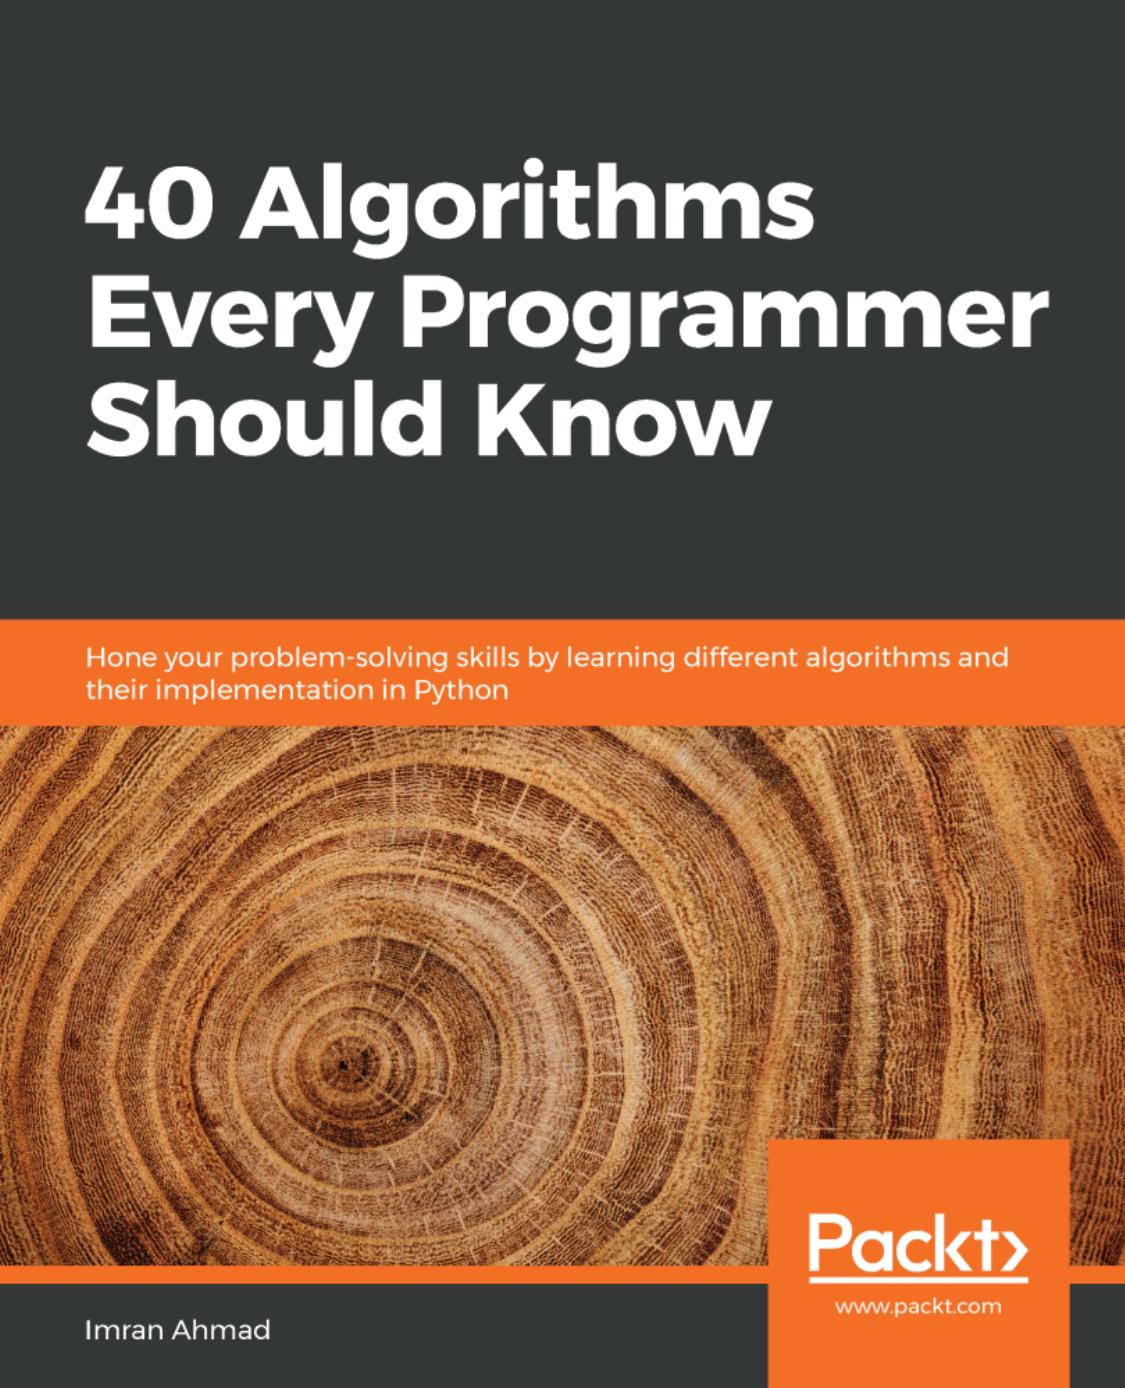 40 Algorithms Every Programmer Should Know: Hone Your Problem-Solving Skills by Learning Different Algorithms and Their Implementation in Python